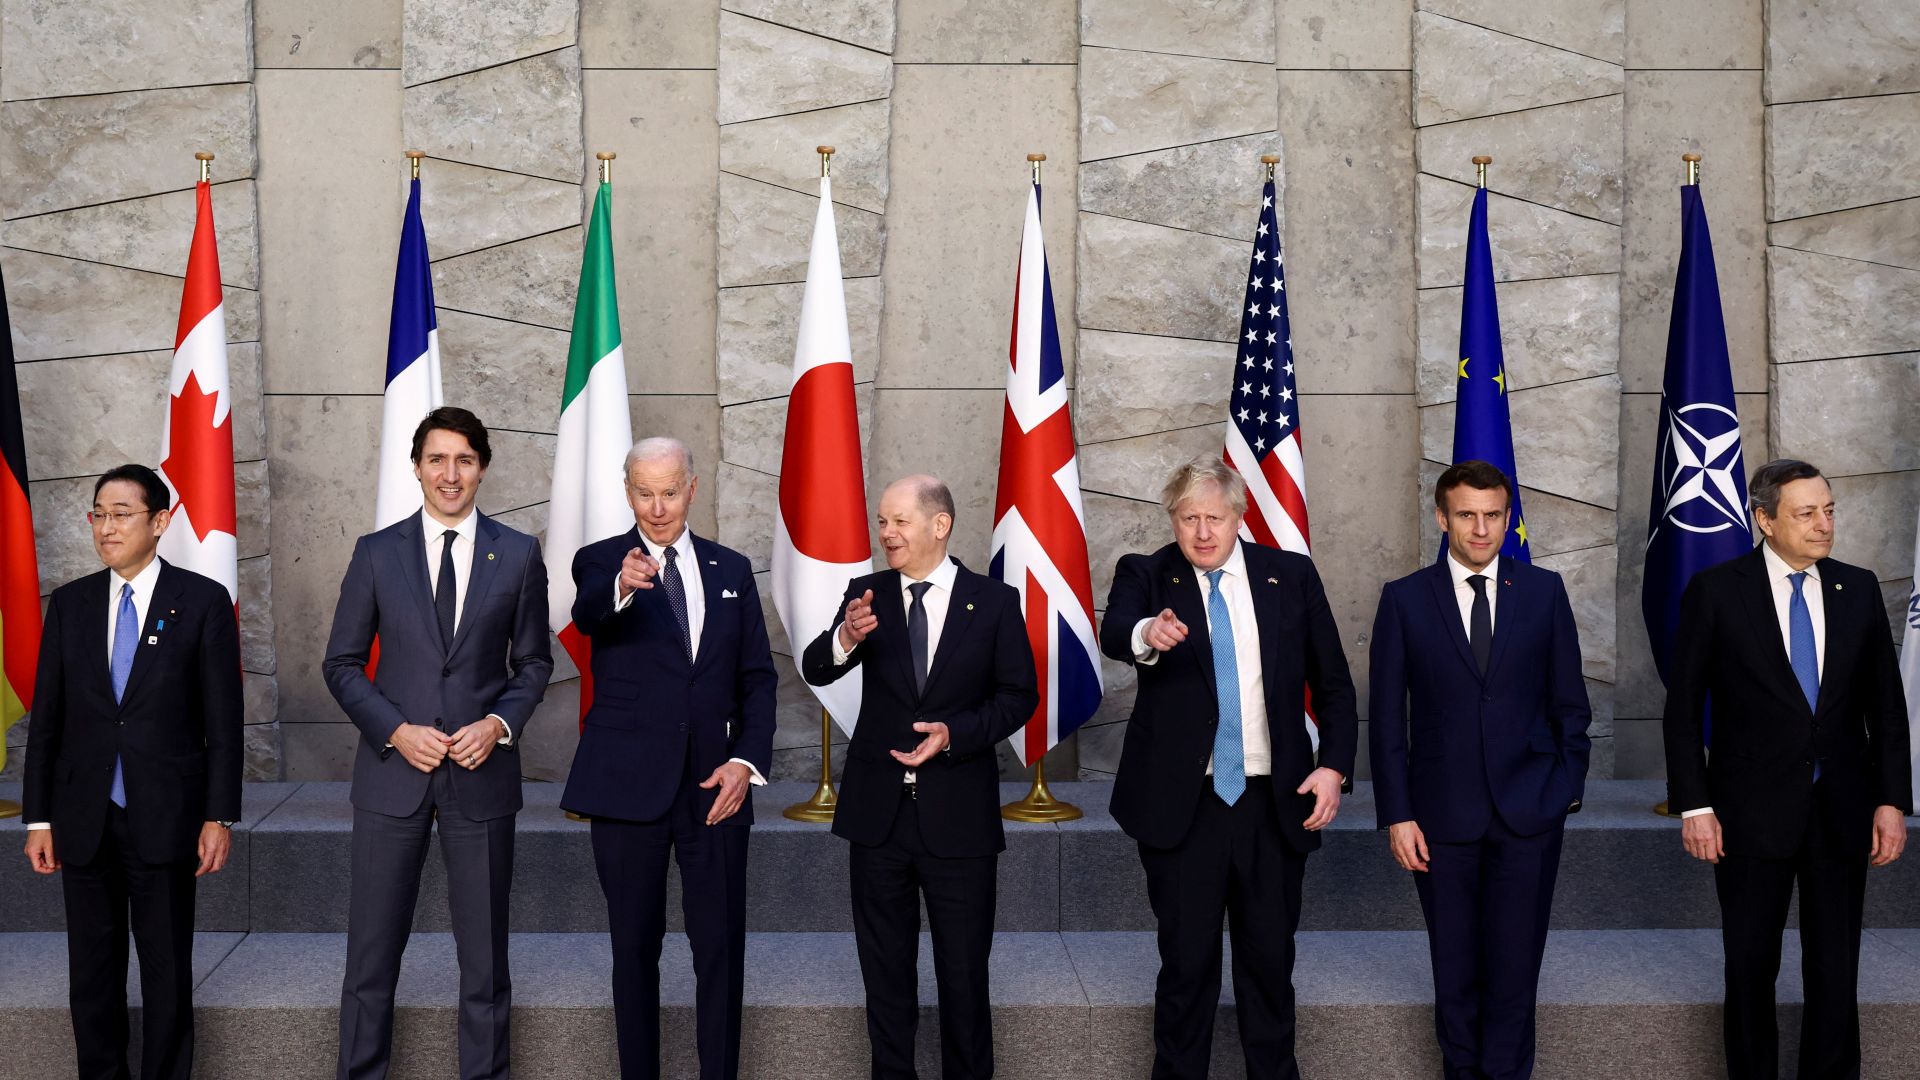 BRUSSELS, BELGIUM - MARCH 24: (L-R) Japanese Prime Minister Fumio Kishida, Canadian Prime Minister Justin Trudeau, U.S. President Joe Biden, German Chancellor Olaf Scholz, Great Britain Prime Minister Boris Johnson, French President Emmanuel Macron and Italian Prime Minister Mario Draghi pose at the G7 summit March 24, 2022 in Brussels, Belgium. (Photo by Henry Nicholls-WPA Pool/Getty Images)